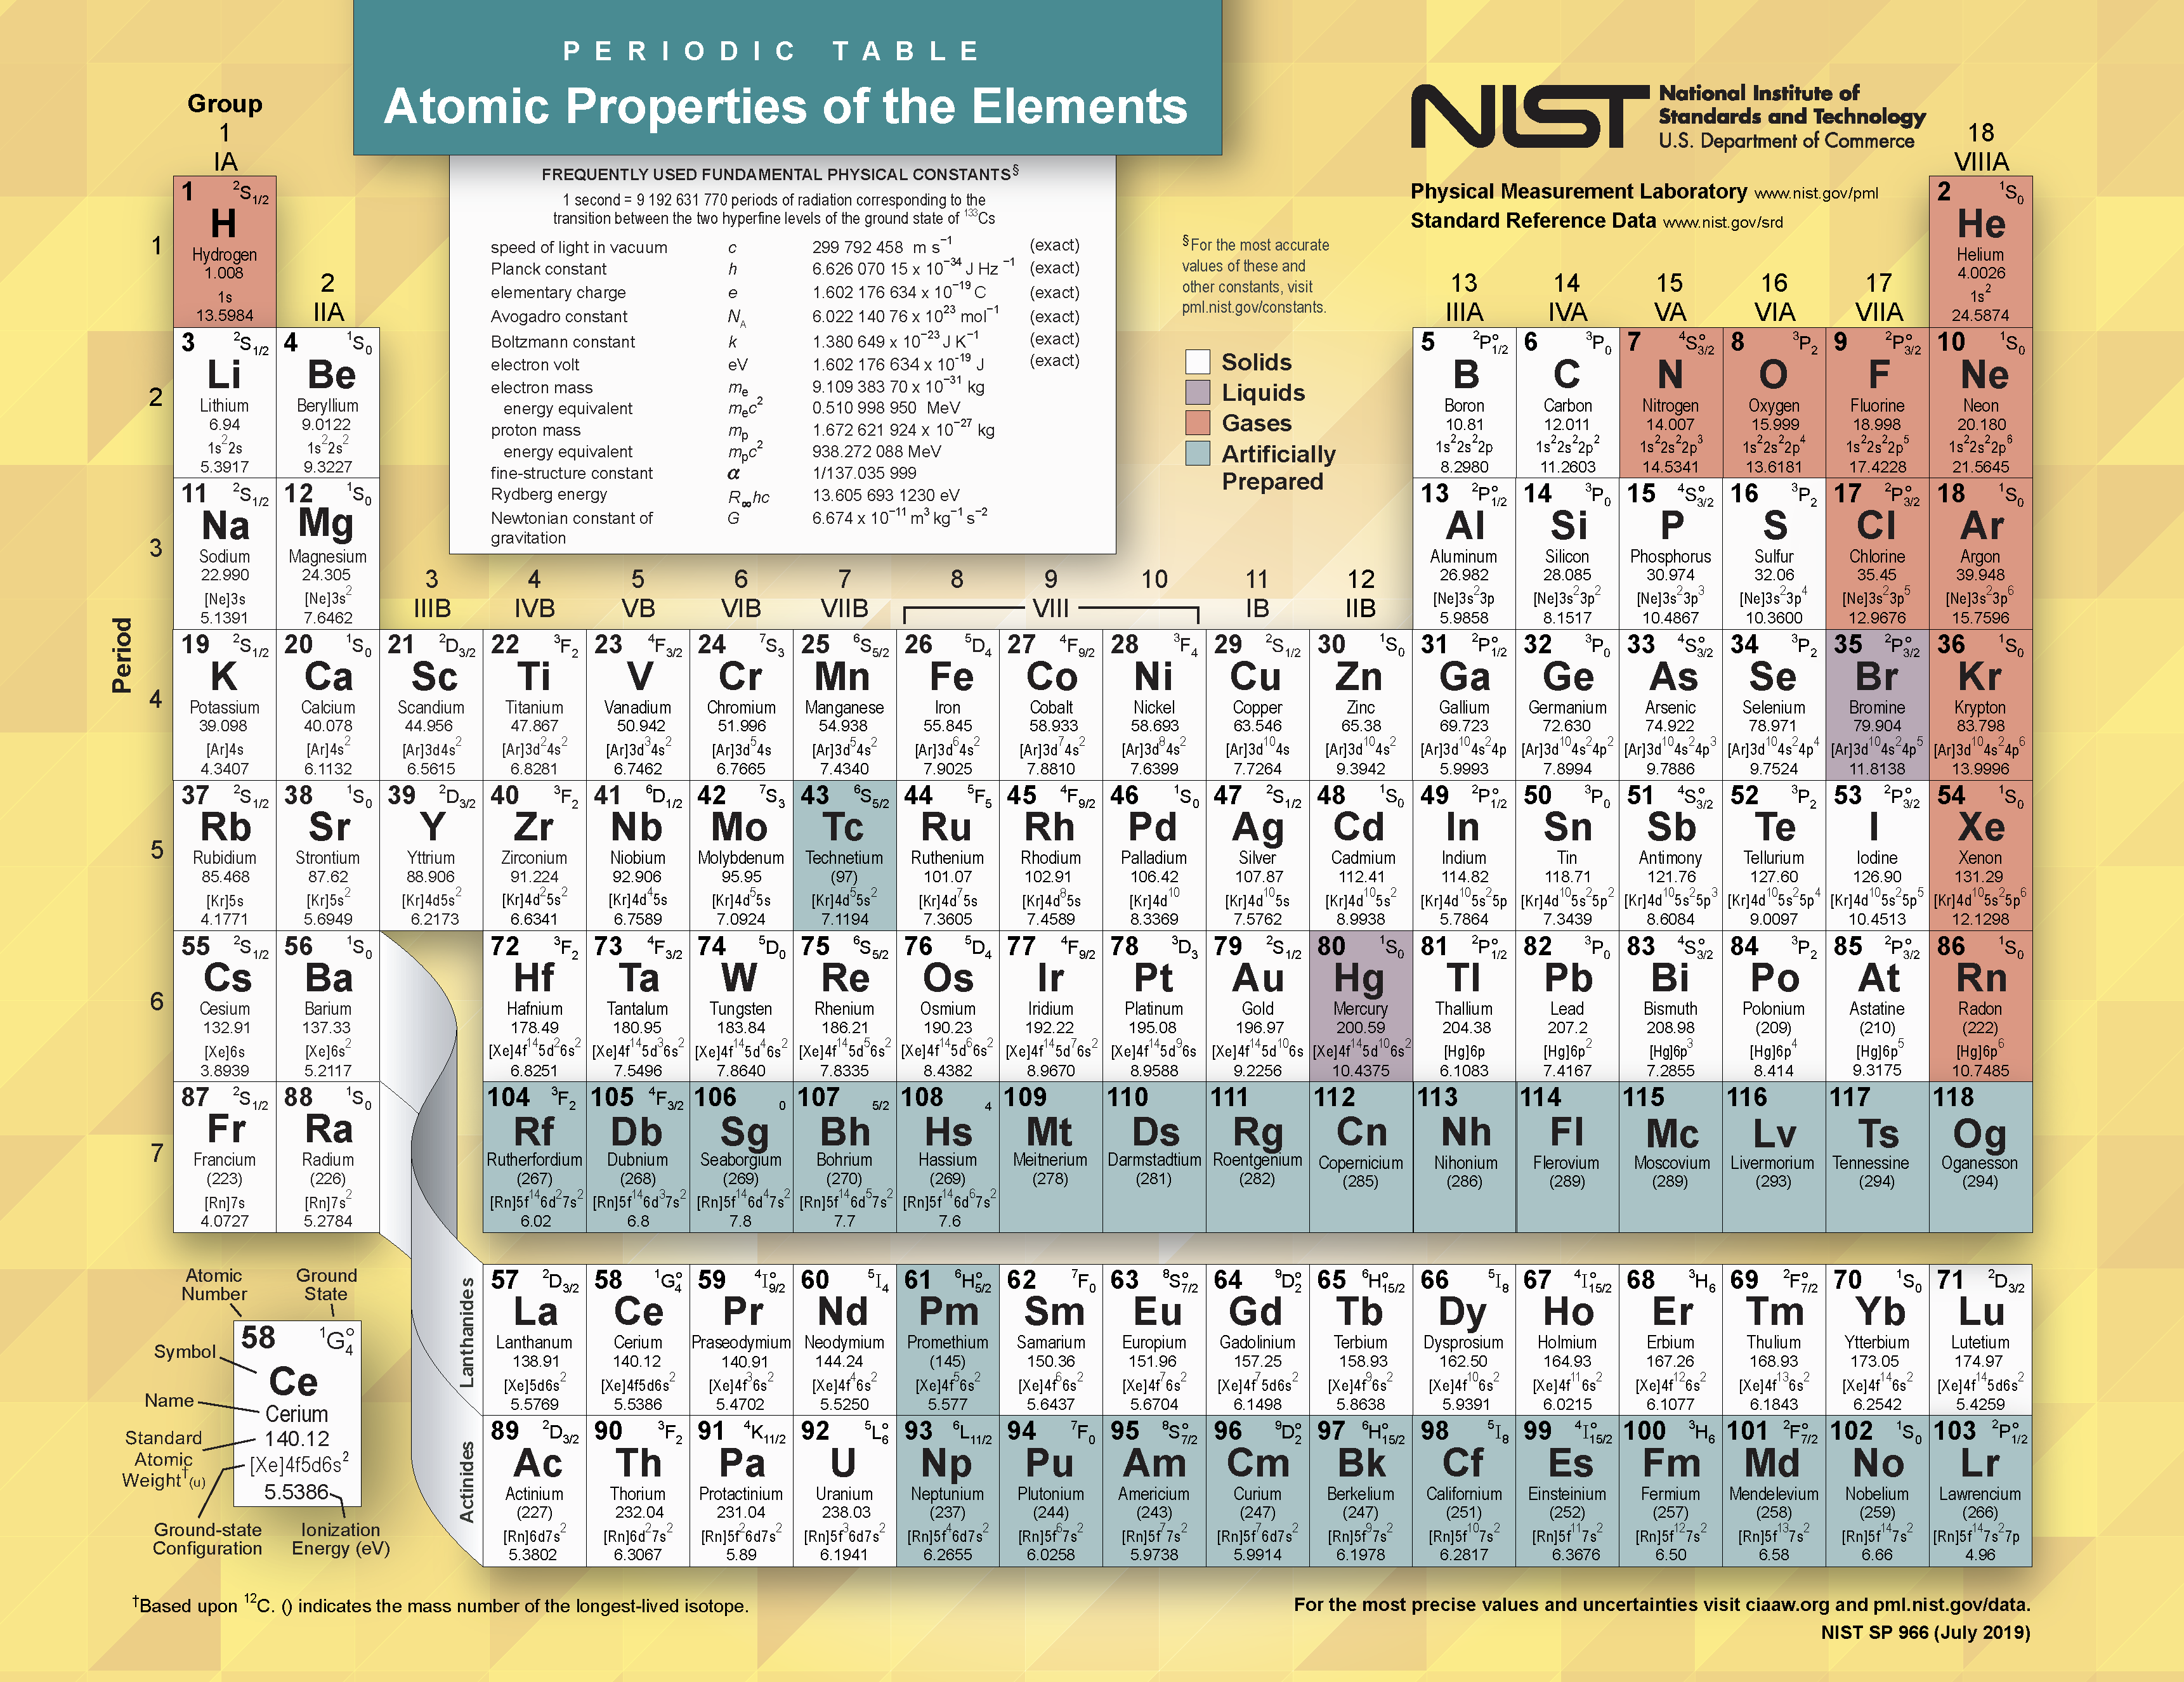 Diagram of the Periodic Table of Elements.